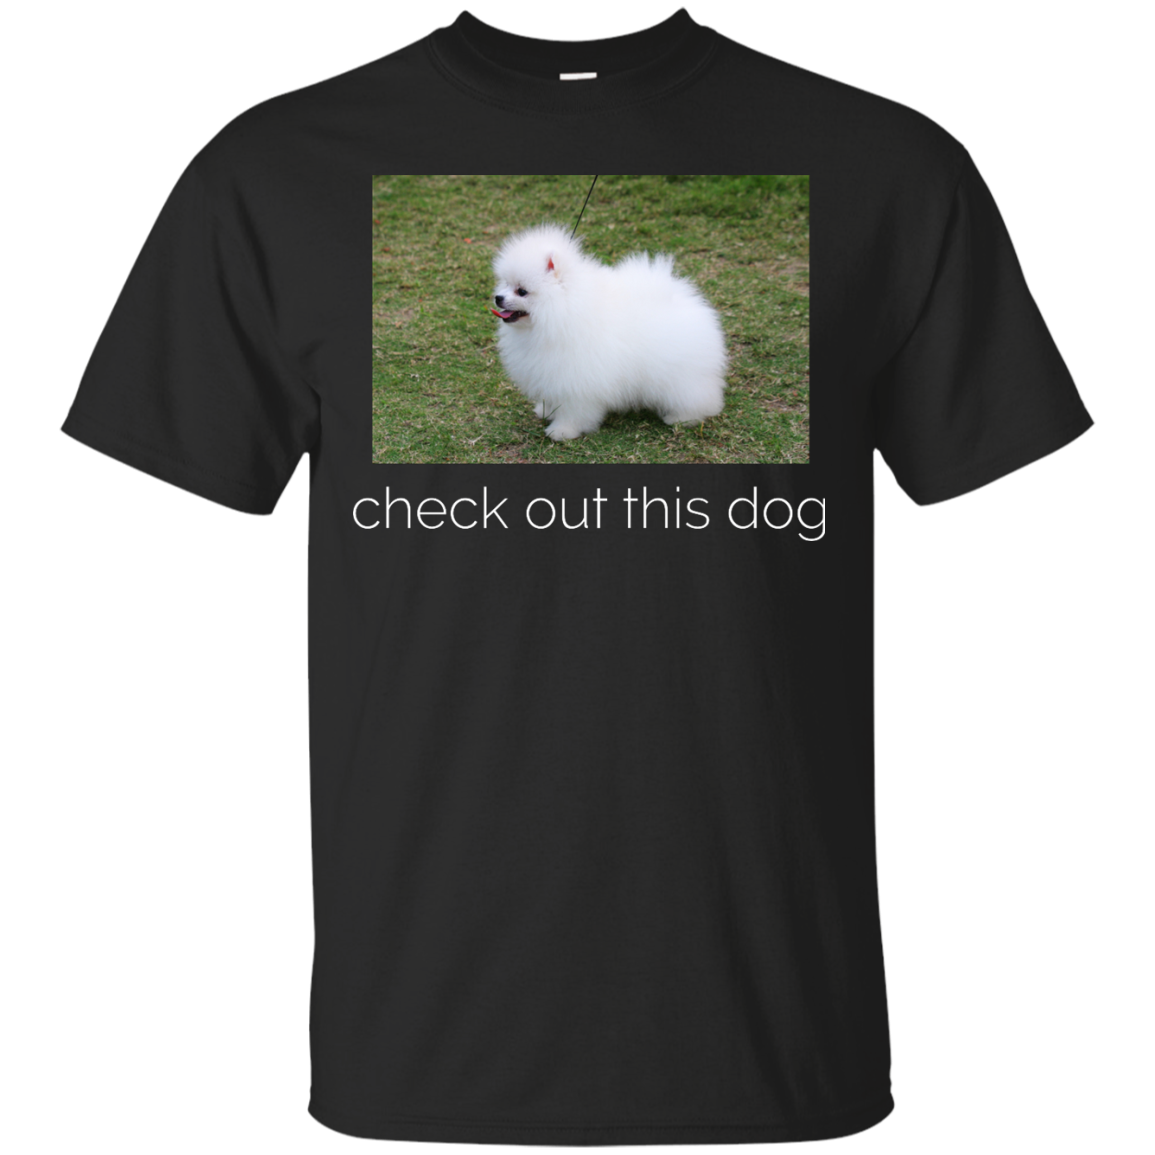 Check out this dog ask me to turn around shirt, sweater